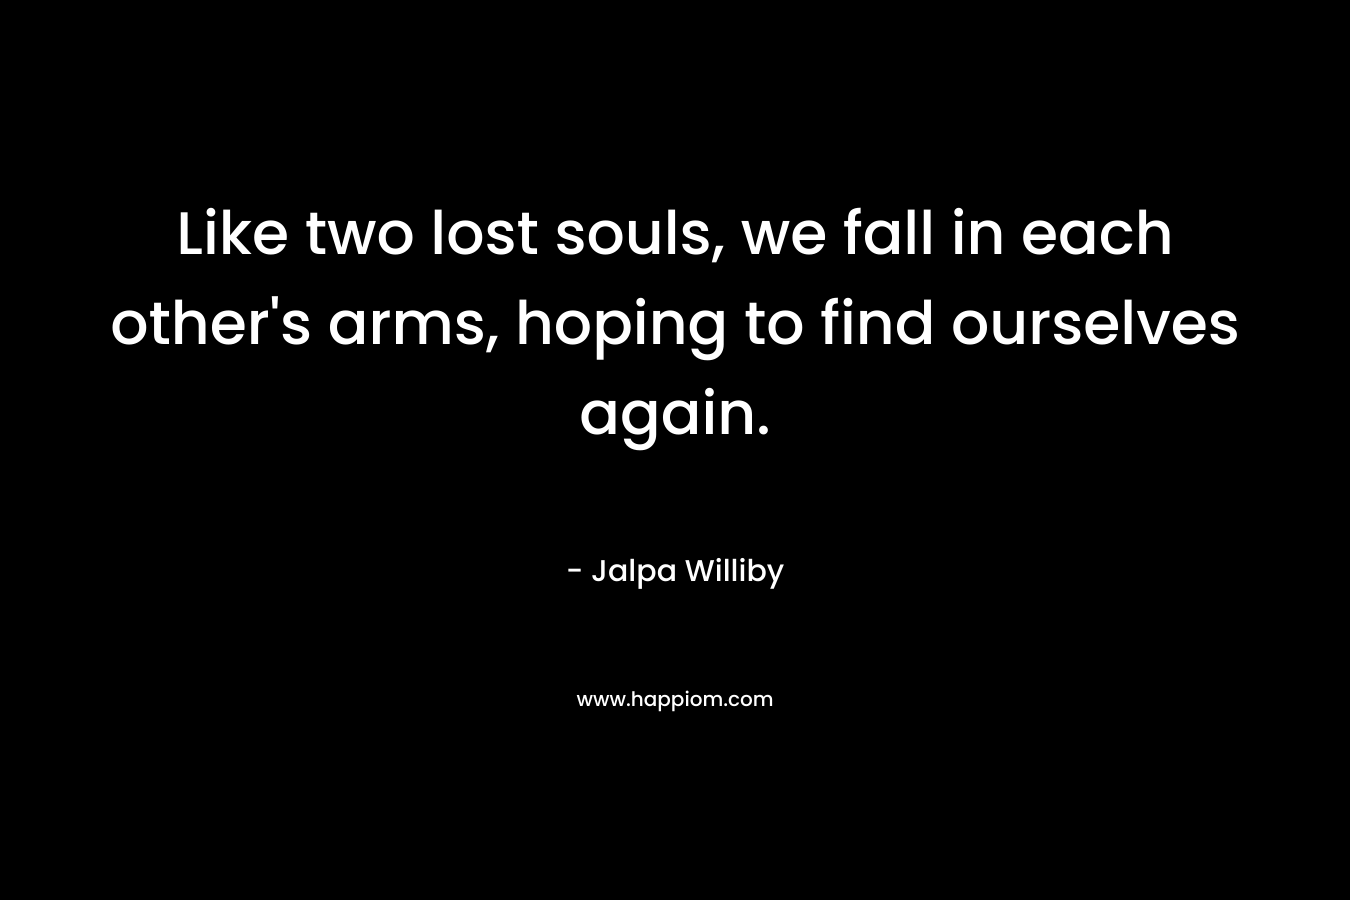 Like two lost souls, we fall in each other’s arms, hoping to find ourselves again. – Jalpa Williby